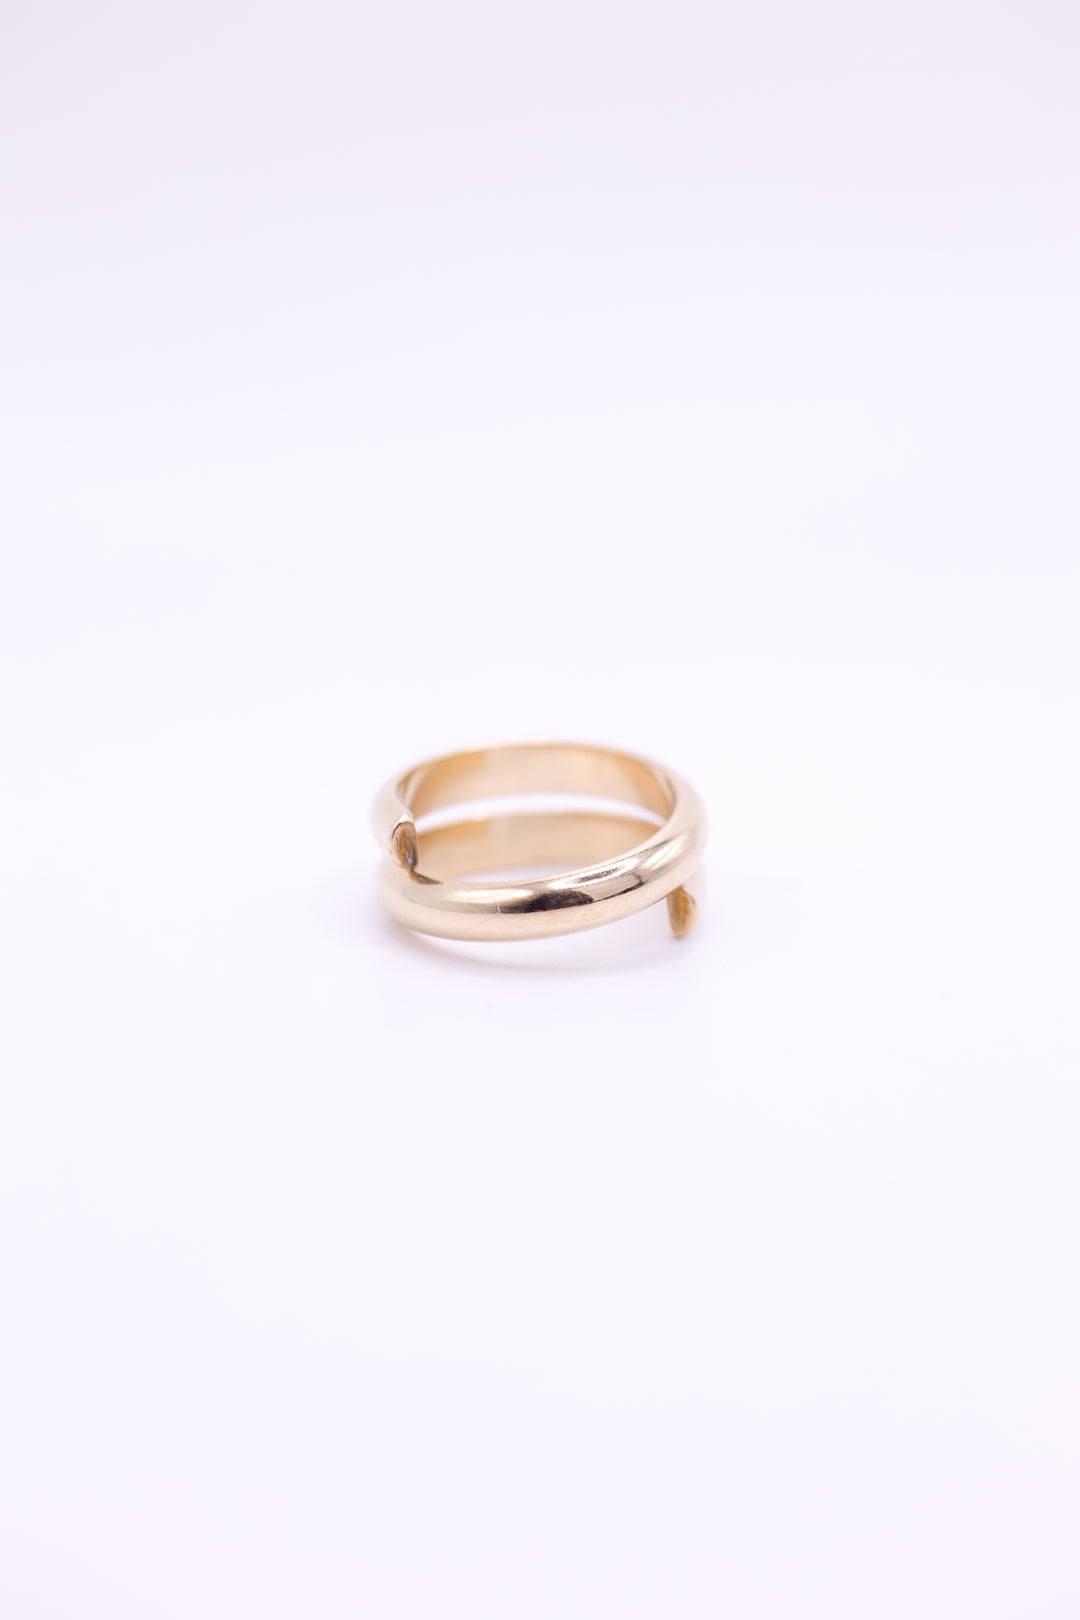 Gold Wrap Ring Handmade by Anna Shae Jewelry in Lexington, Kentucky